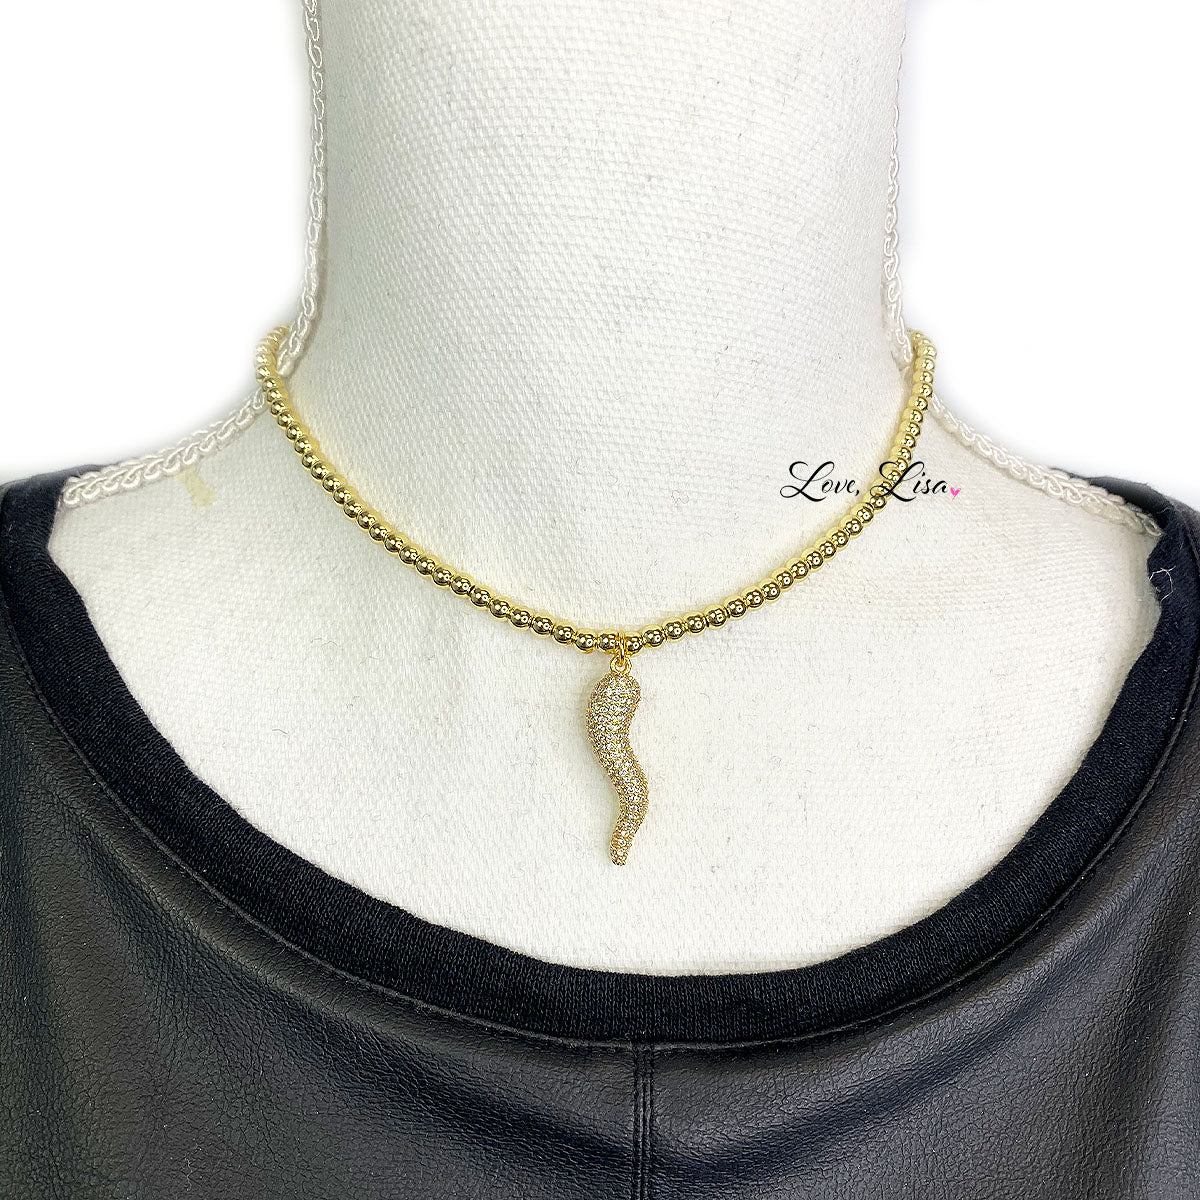 Simply Stunning Pave Horn Choker Necklace